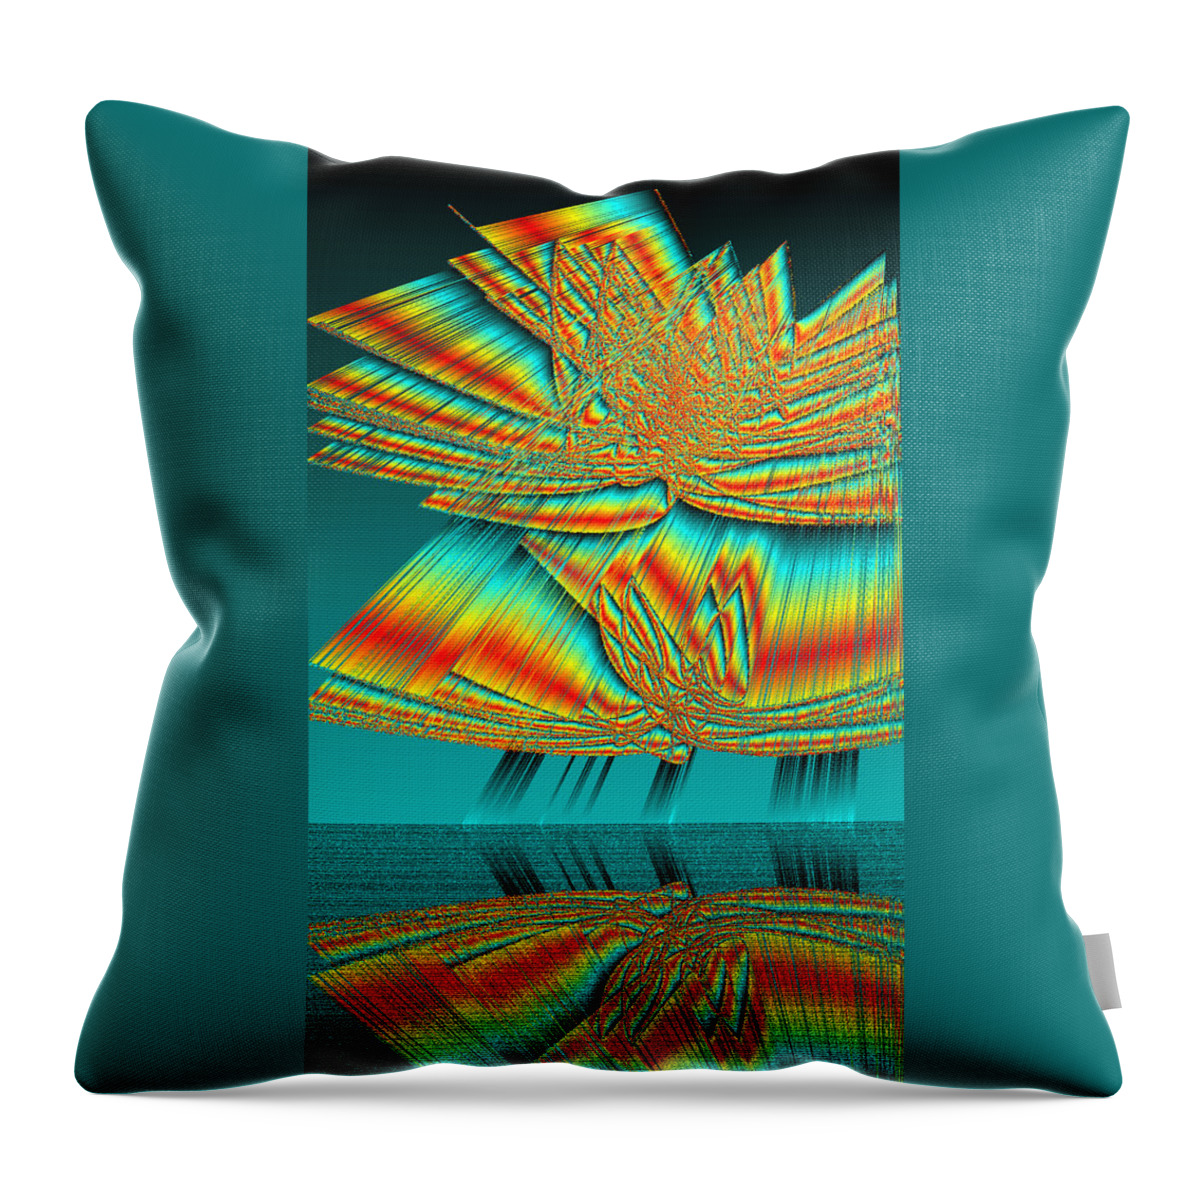 Rithmart Abstract Lines Organic Random Computer Digital Shapes Acanvas Art Background Colors Designed Digital Display Images One Random Series Shapes Smooth Spiky Streaming Three Using Throw Pillow featuring the digital art Ac-7-71-#rithmart by Gareth Lewis